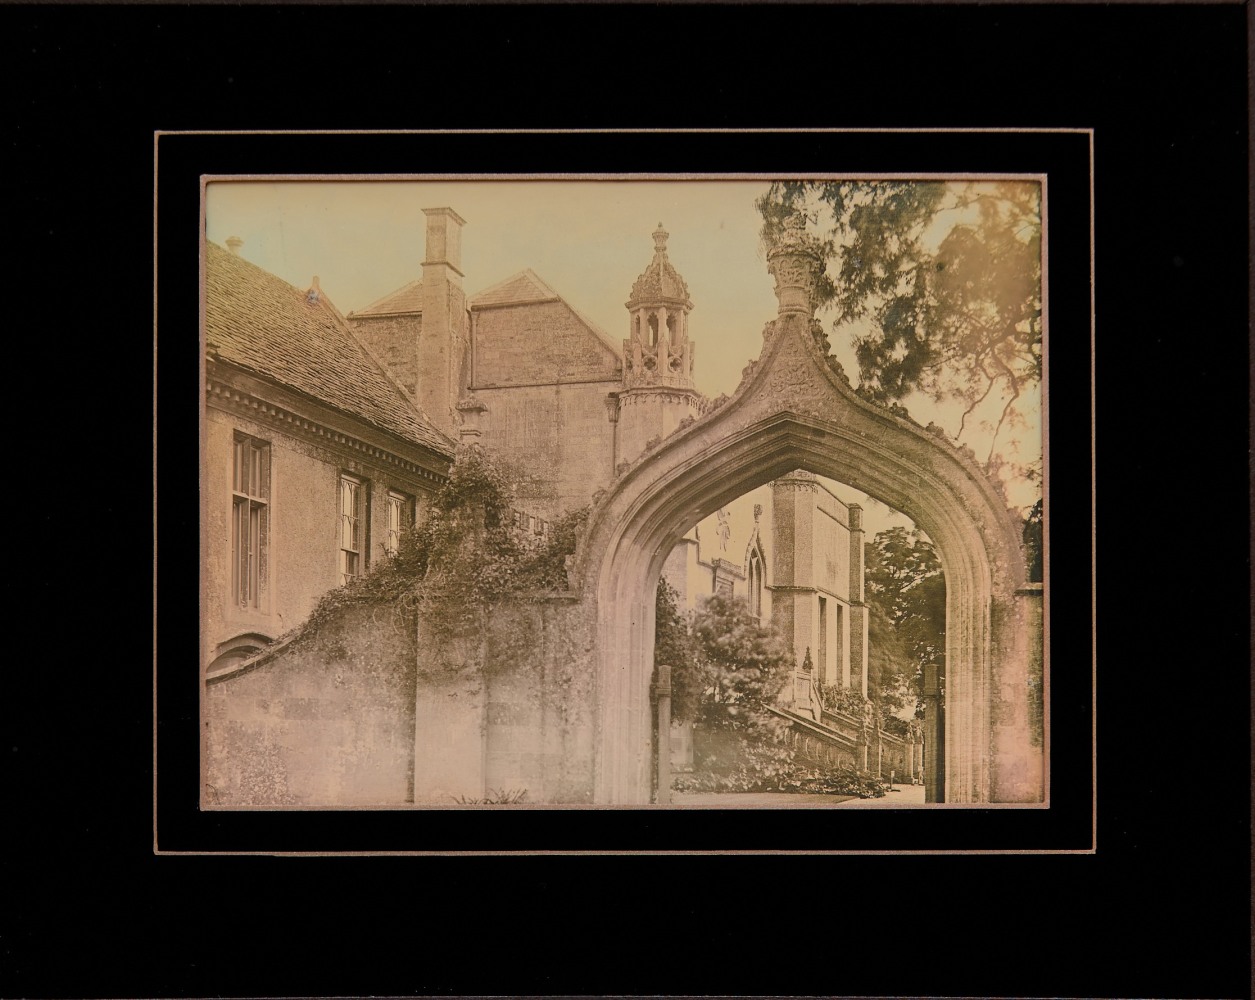 Mike ROBINSON (Canadian, b. 1961) &quot;Gothick Gateway&quot;, Lacock Abbey, 2017 Half plate daguerreotype Framed in reverse paint passe-partout 15.8 x 19.7 cm Signed, titled, and dated in ink on studio label, frame verso